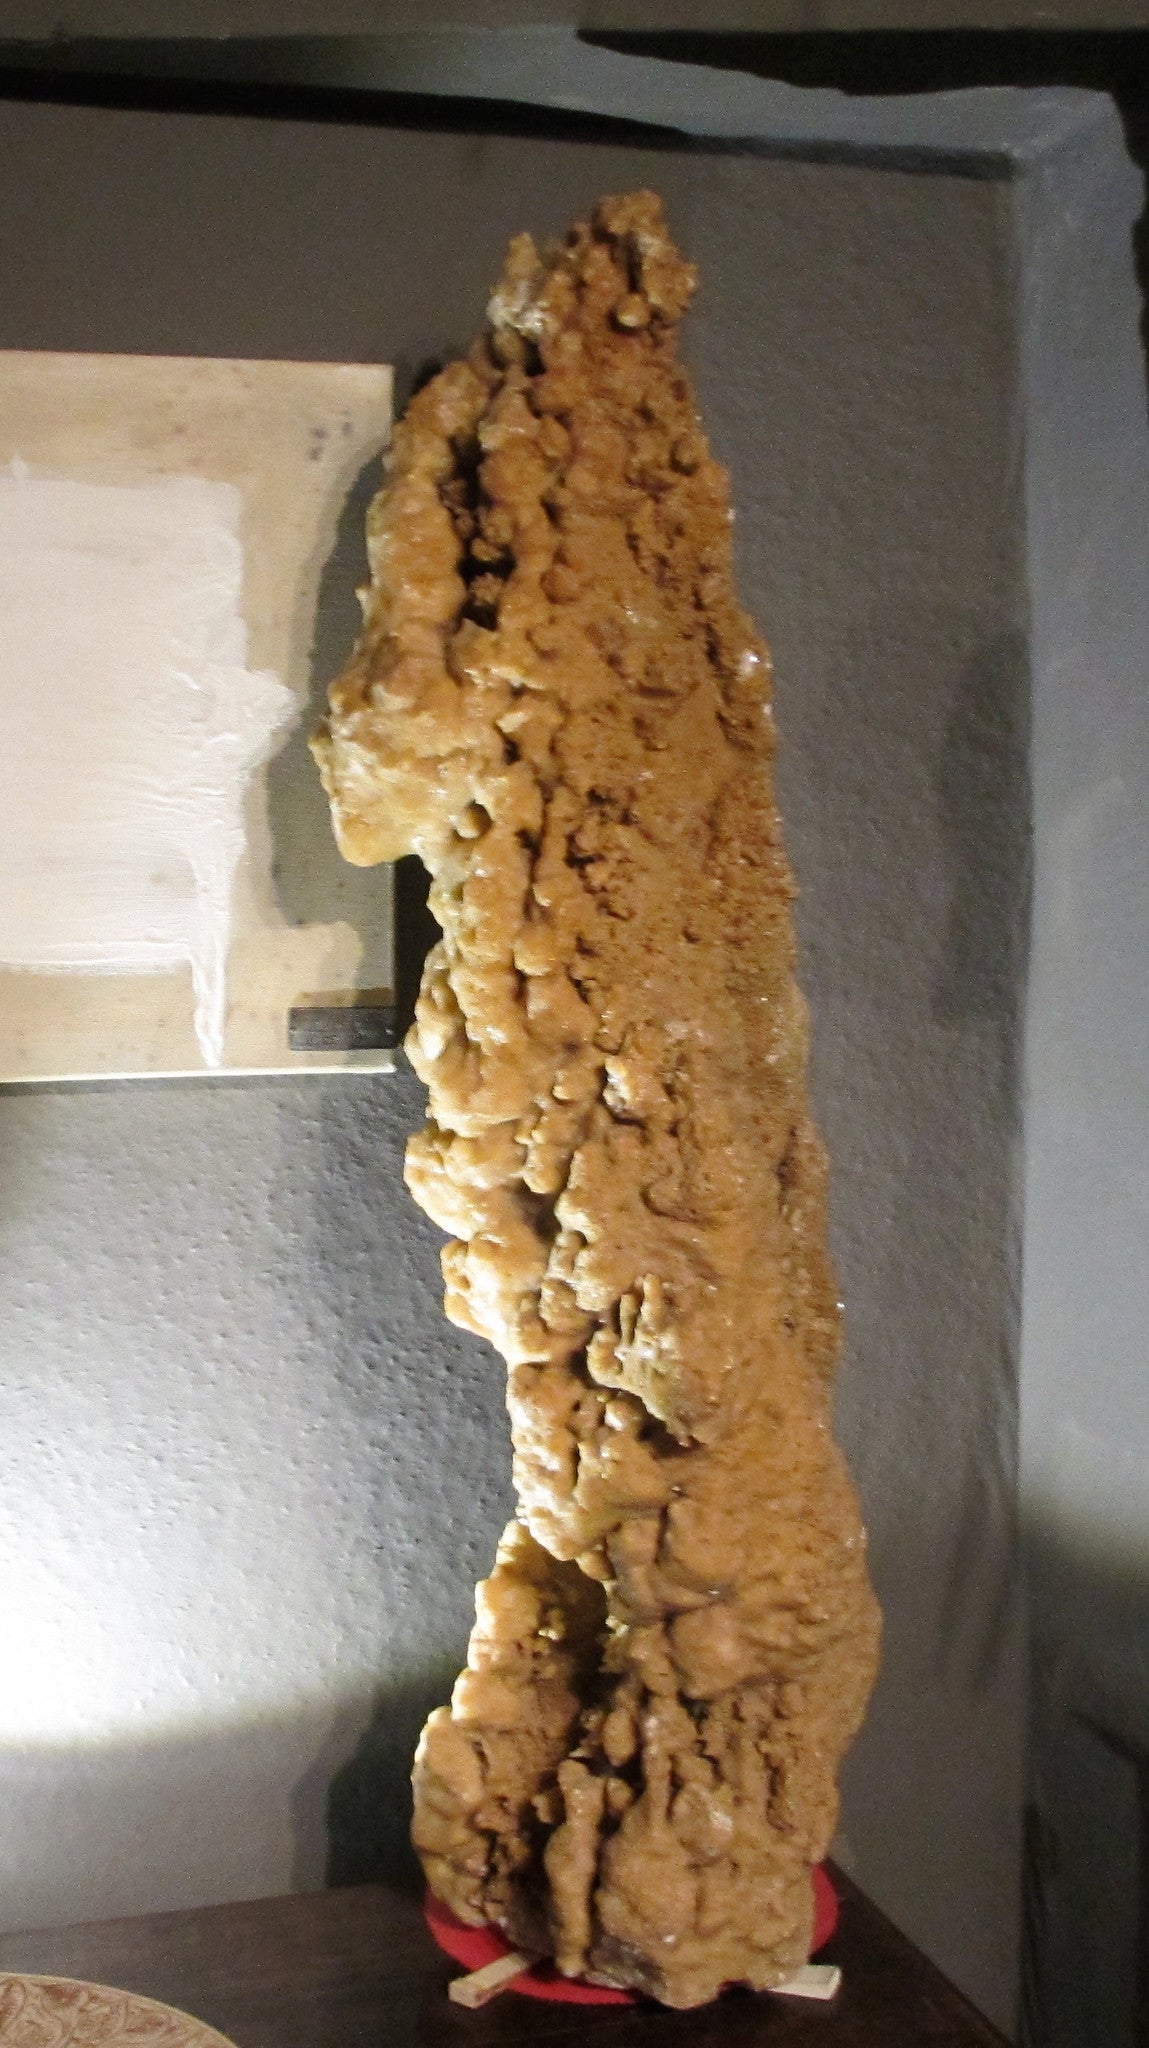 Do you know your Stalactites from your Stalagmites?